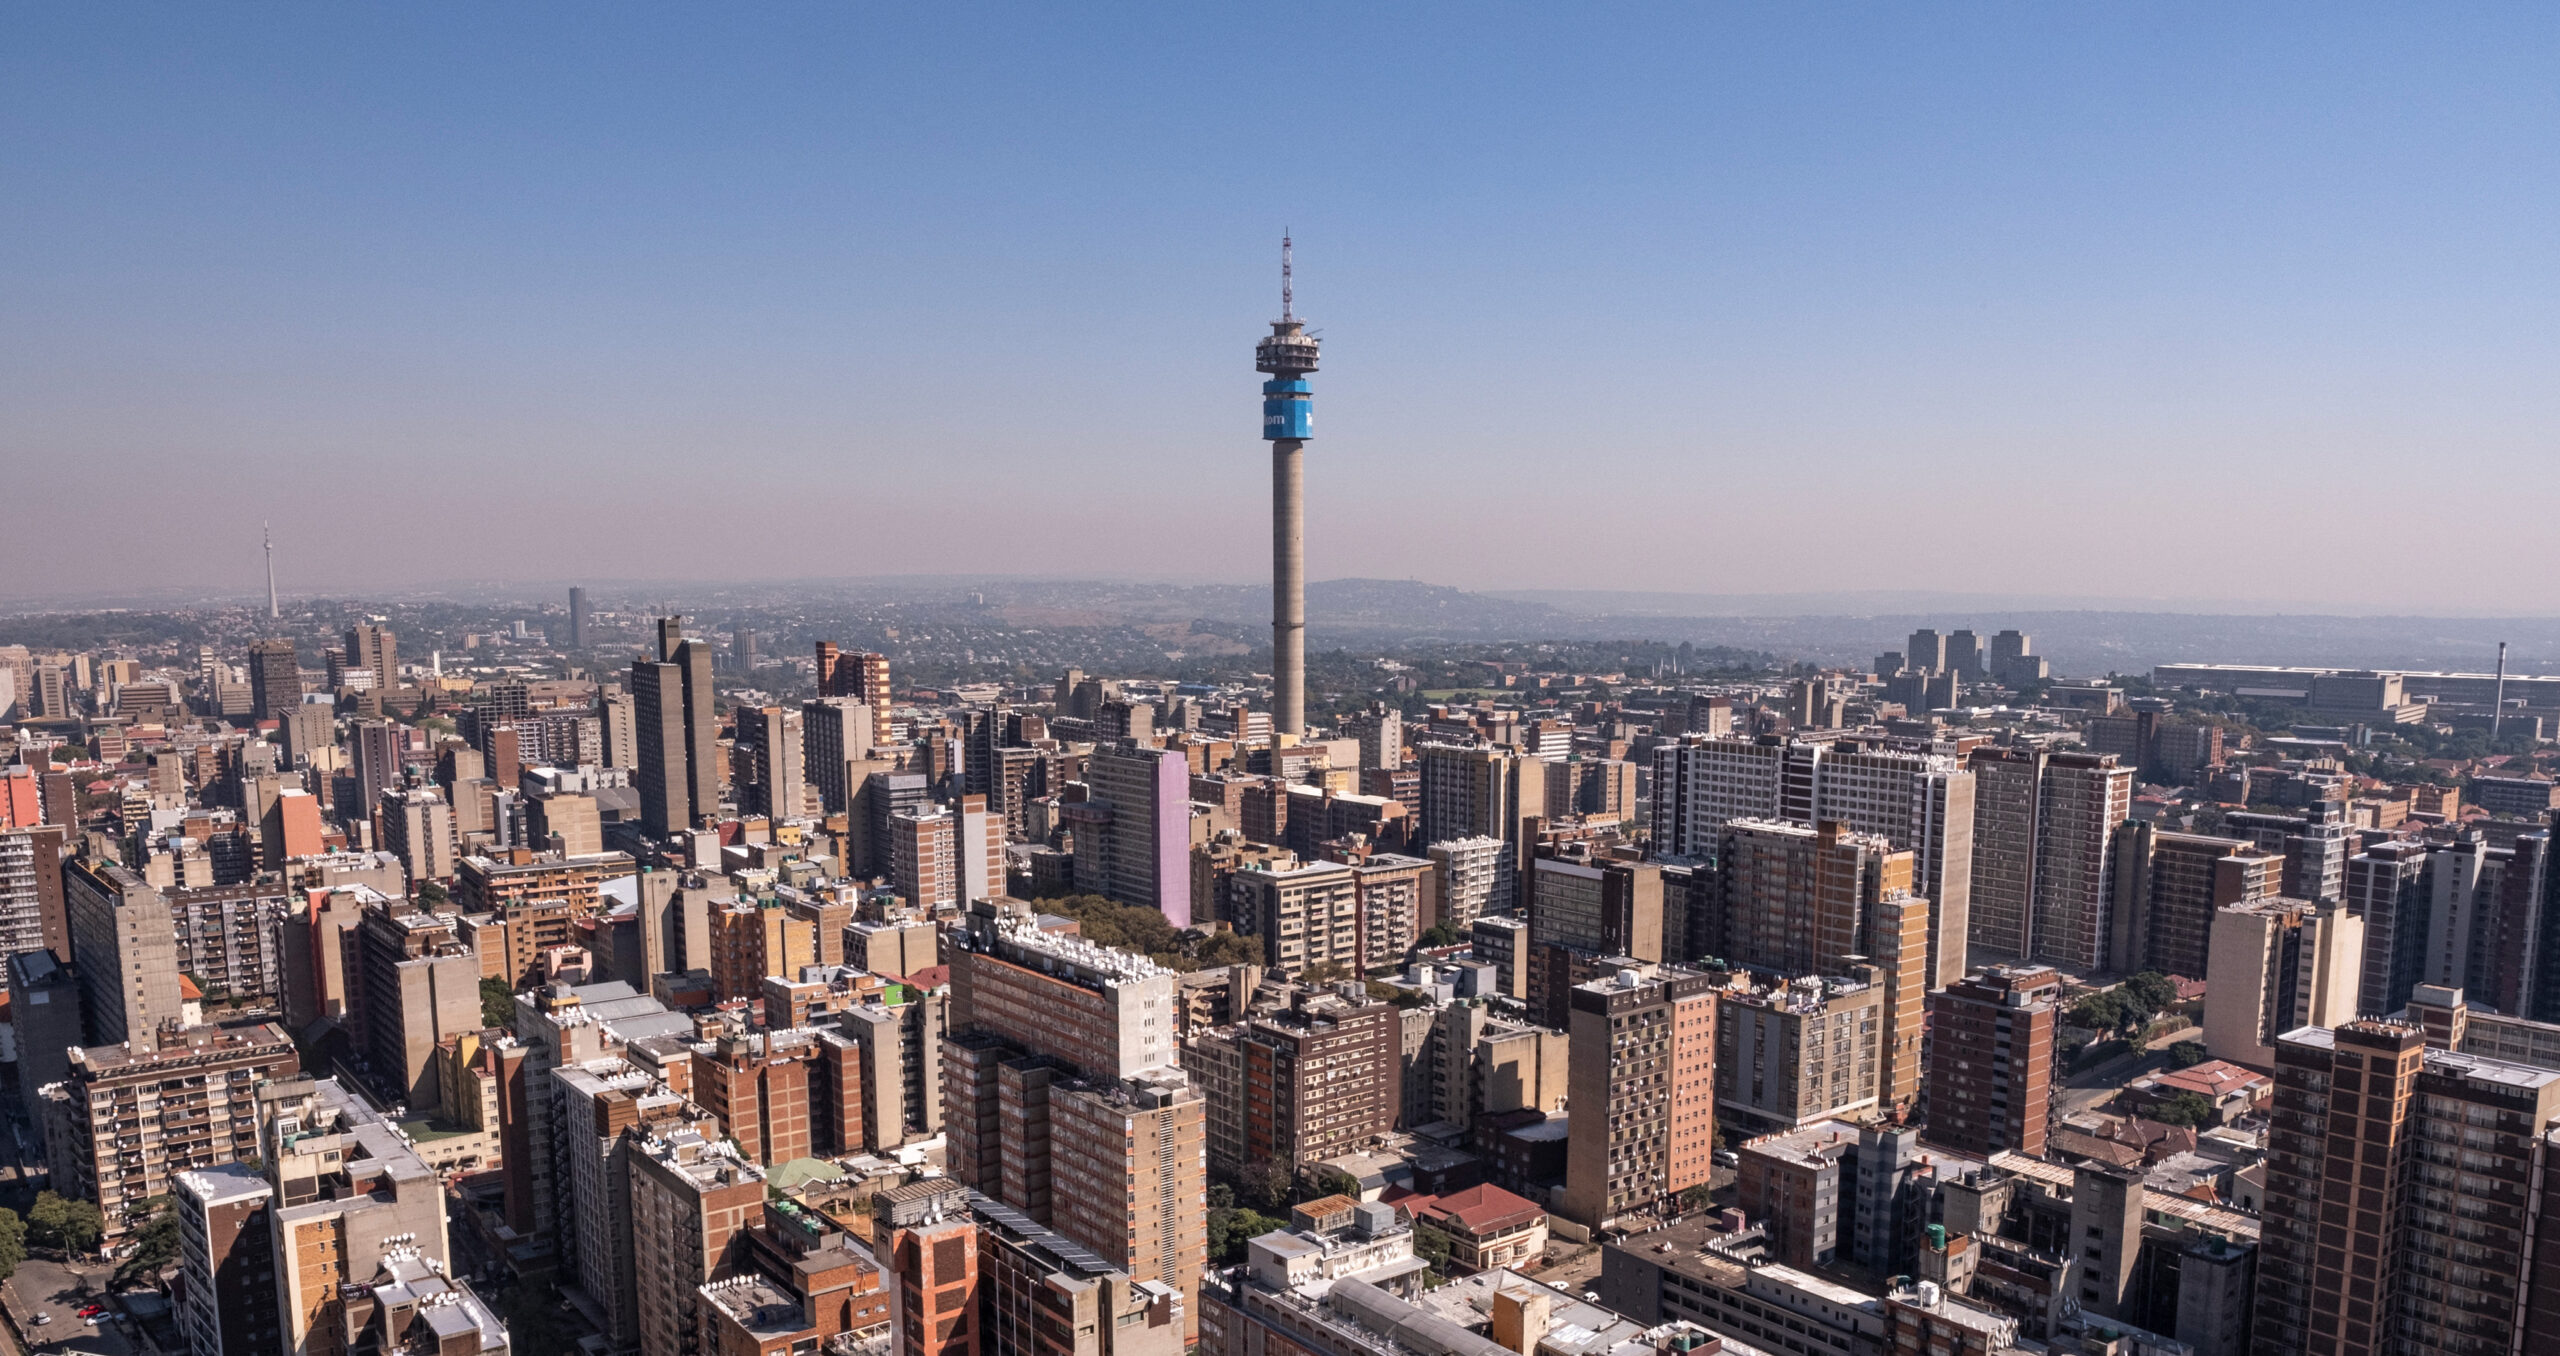 Johannesburg: South Africa is one of the continent’s biggest emitters, with Nigeria and Egypt. The three will take up the bulk of financing to transition their economies away from fossil fuels. (Photo: Emmanuel Corset/AFP via Getty Images) 